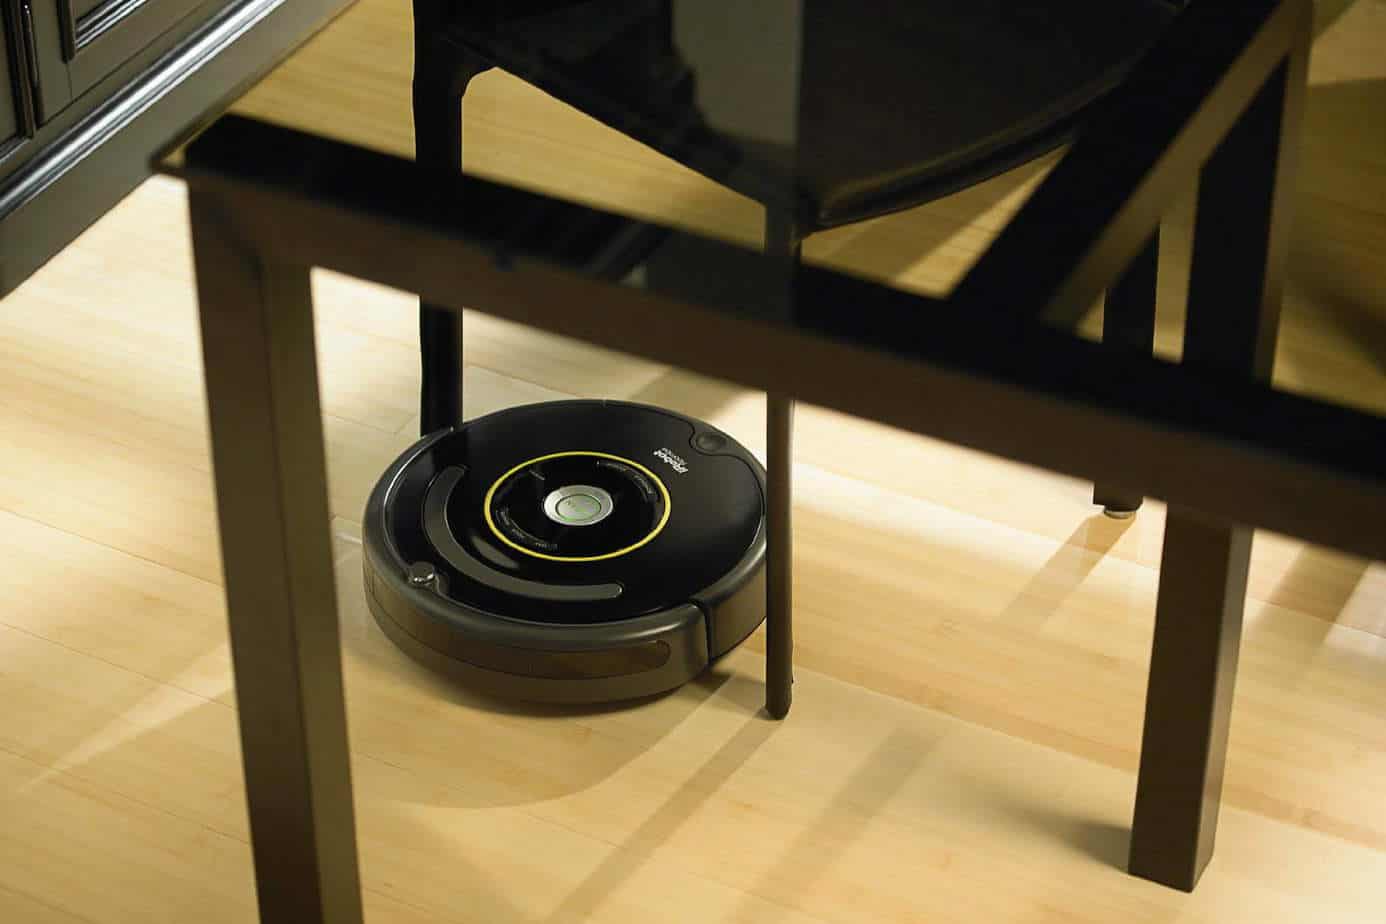 The Ultimate Review Of Best Robot Vacuums In 2019 Research Based